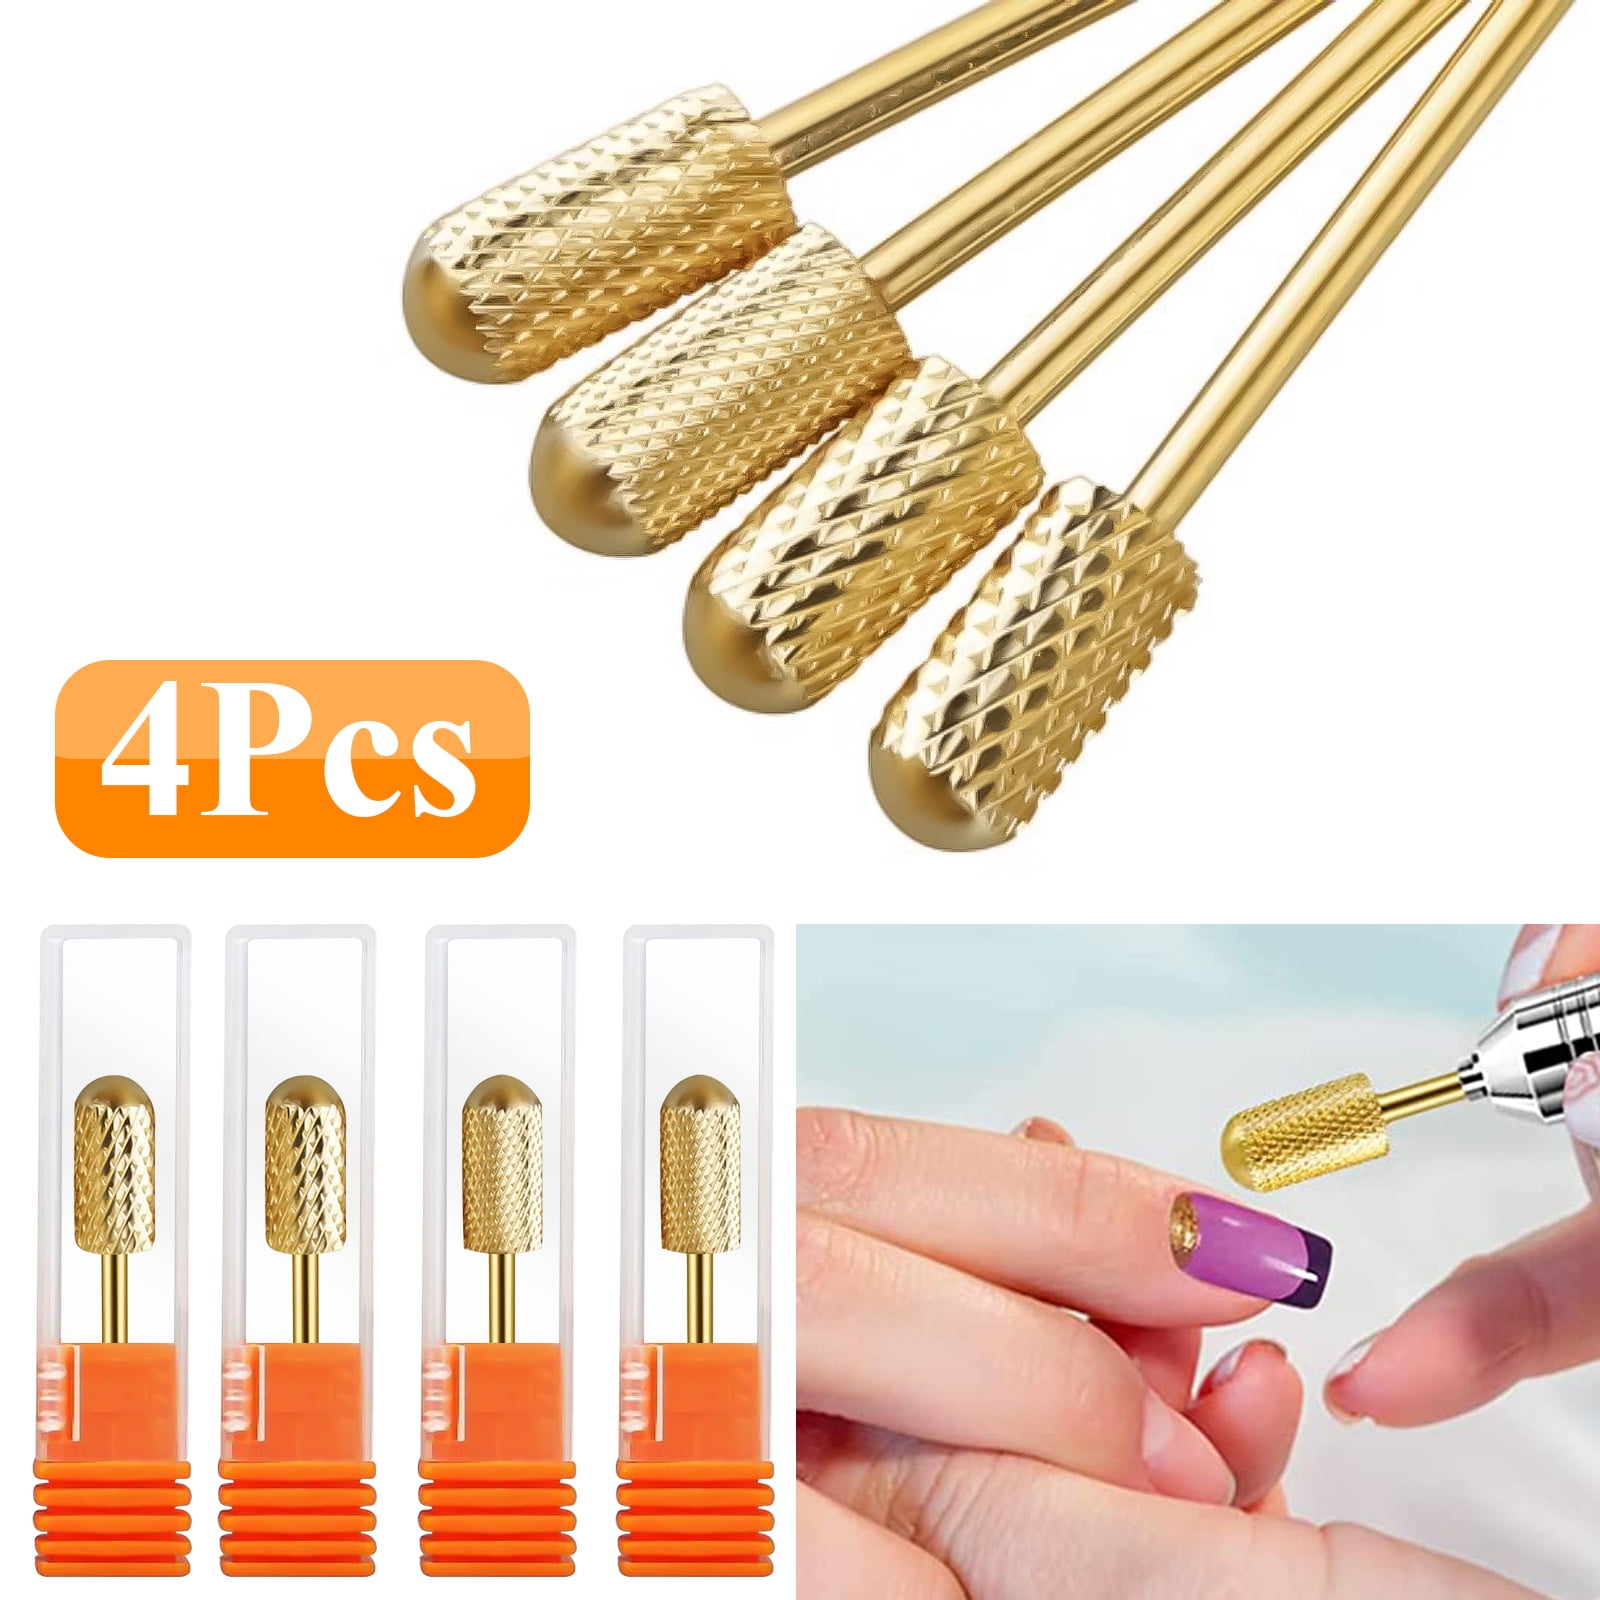 TSV 4pcs Carbide Clean Nail Drill Bit, Acrylic Nail File Drill Bit Cuticle  Drill Bits, Nail Art Tools for Gel Nails Cuticle Manicure Pedicure (Gold) -  